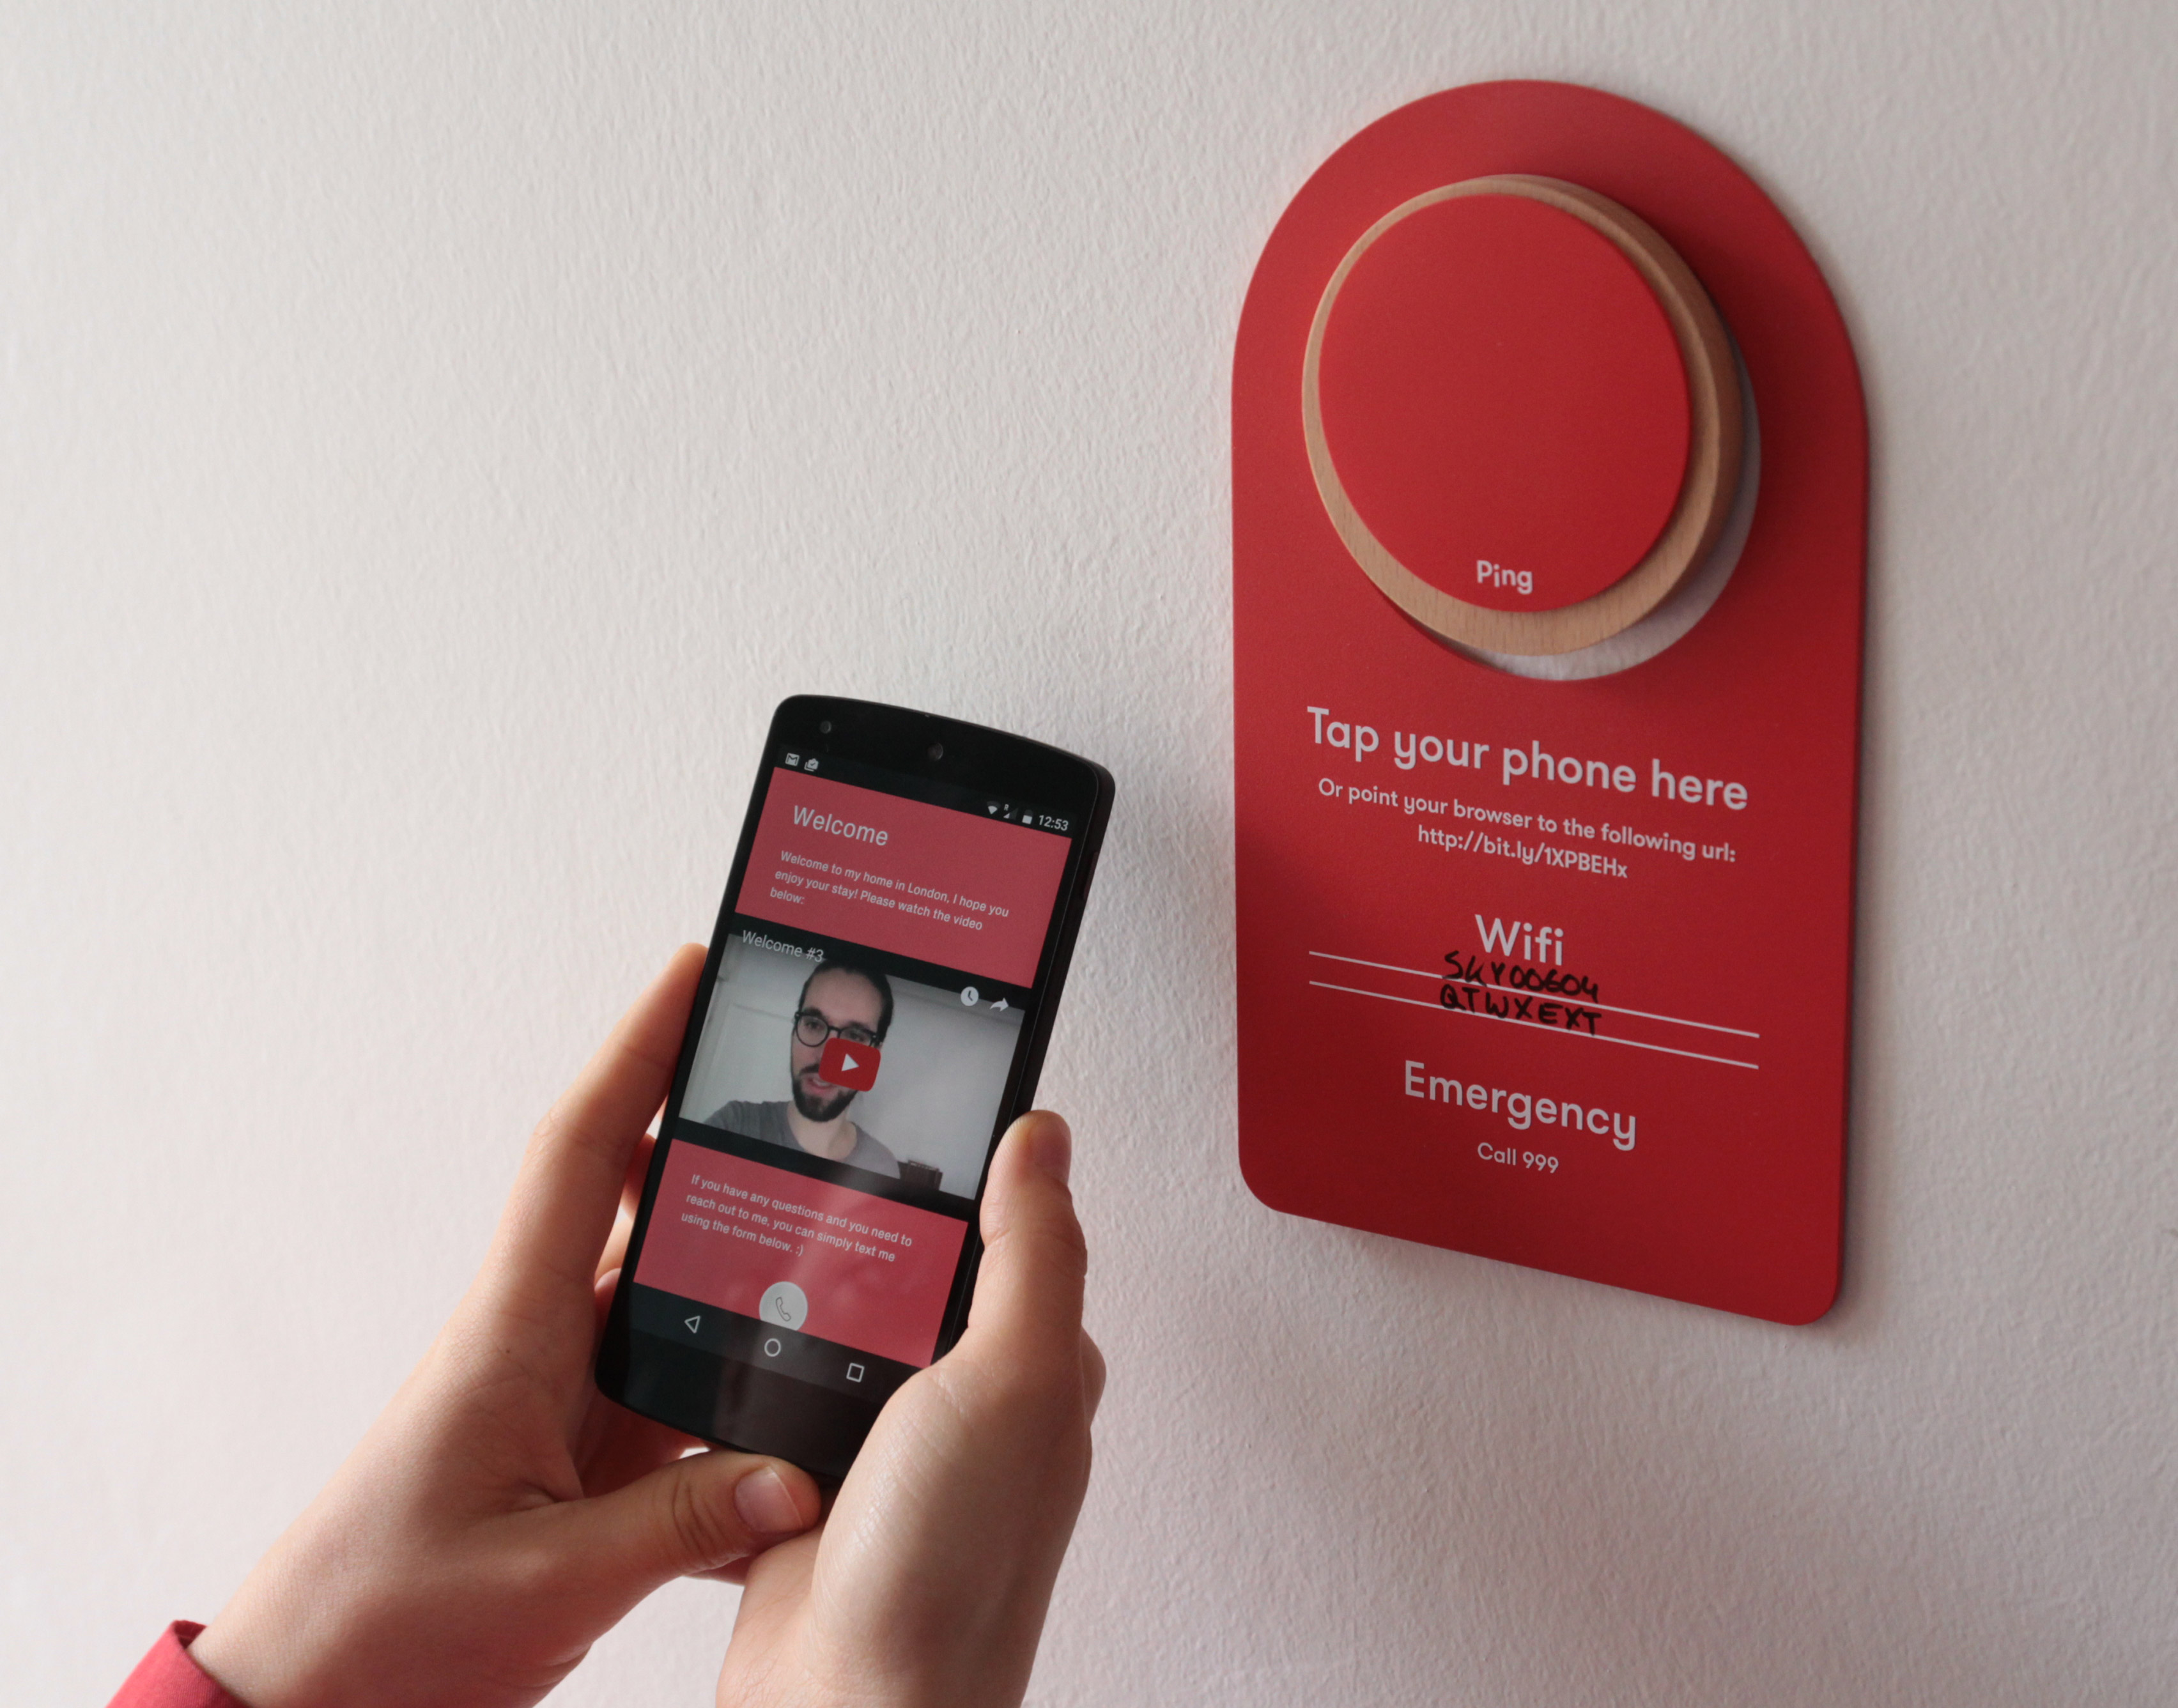 Kristian Knobloch's Ping system is a digital house manual for Airbnb guests